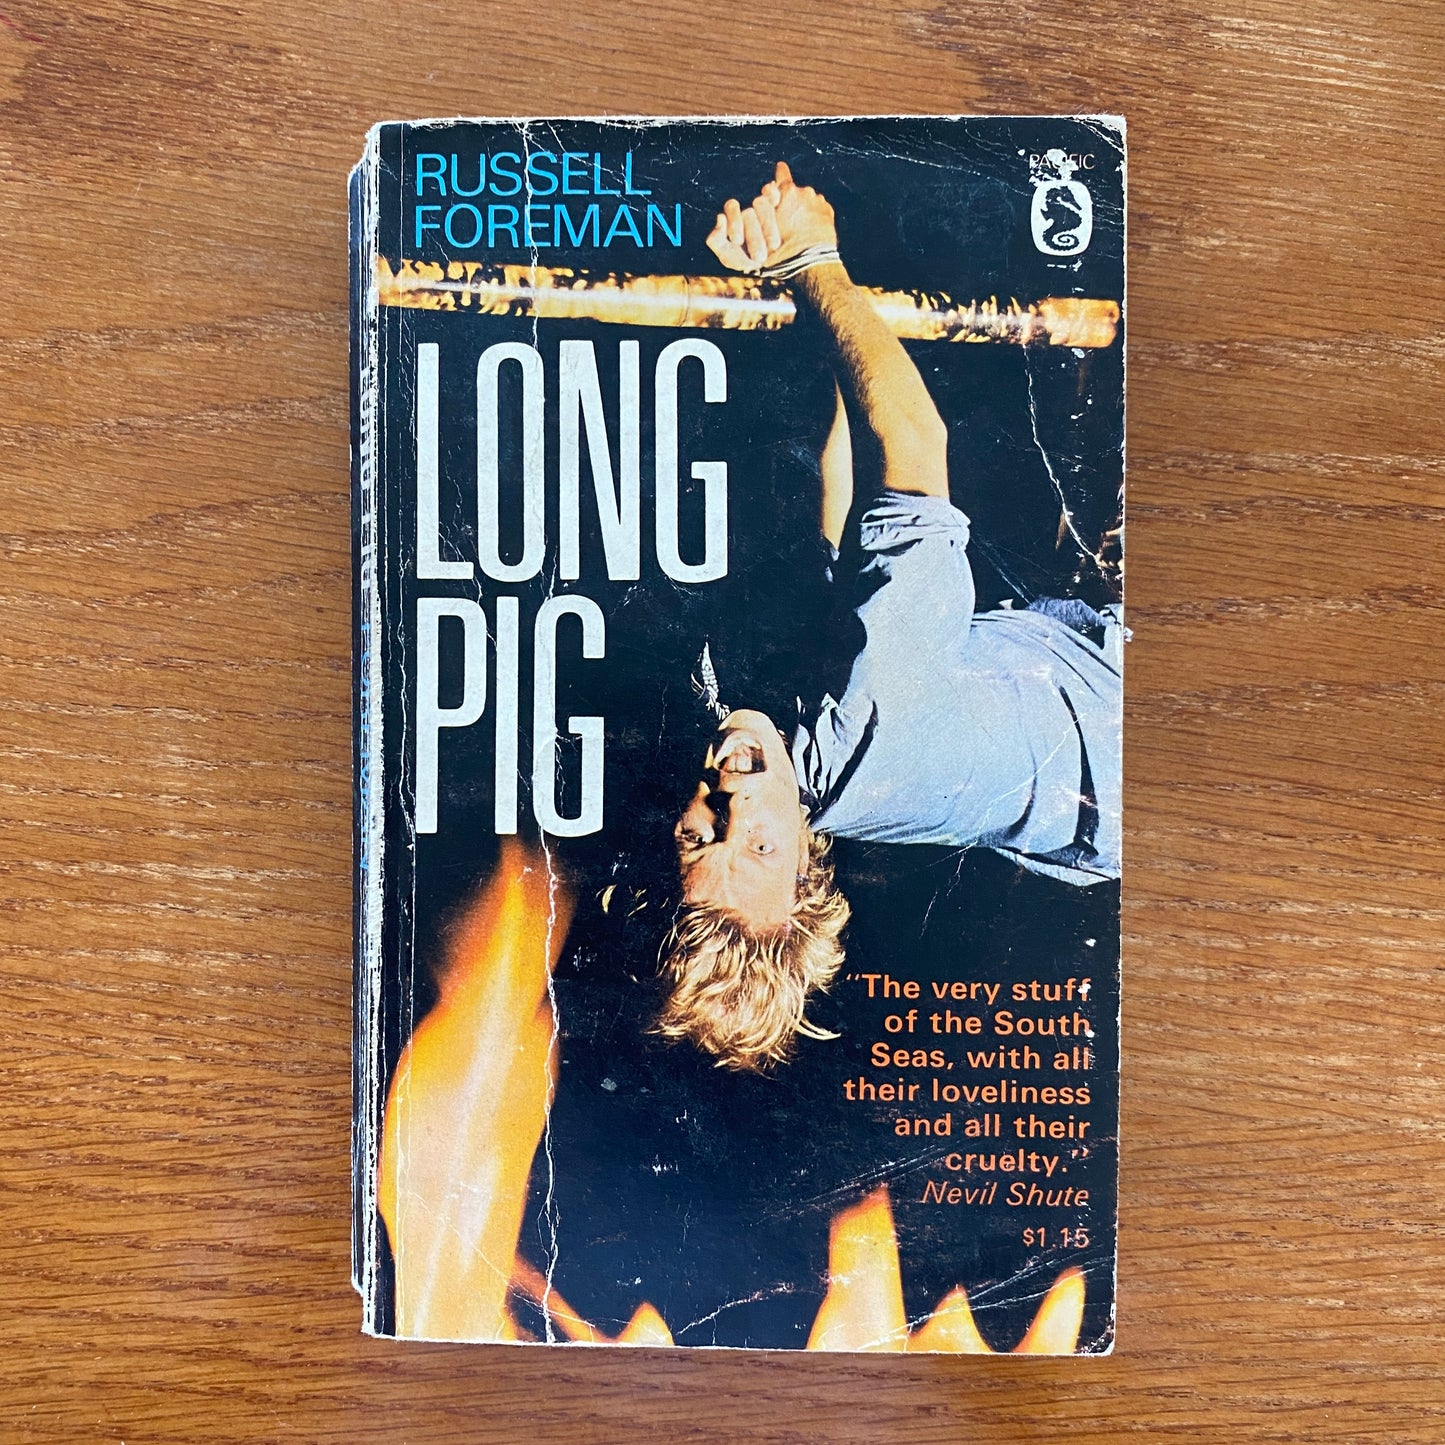 The Long Pig - Russell Foreman